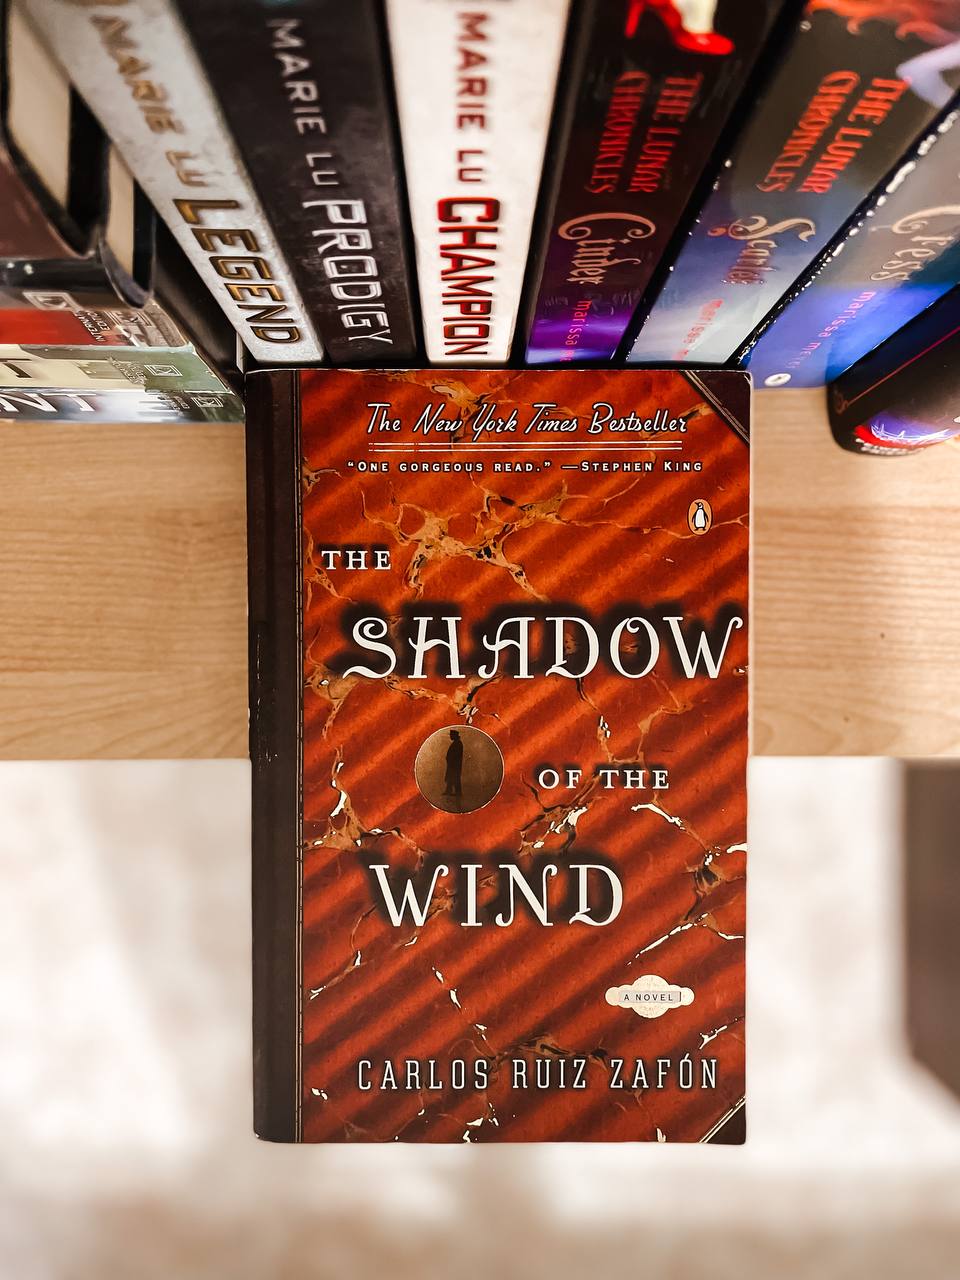 the shadow of the wind laying flat on a bookshelf